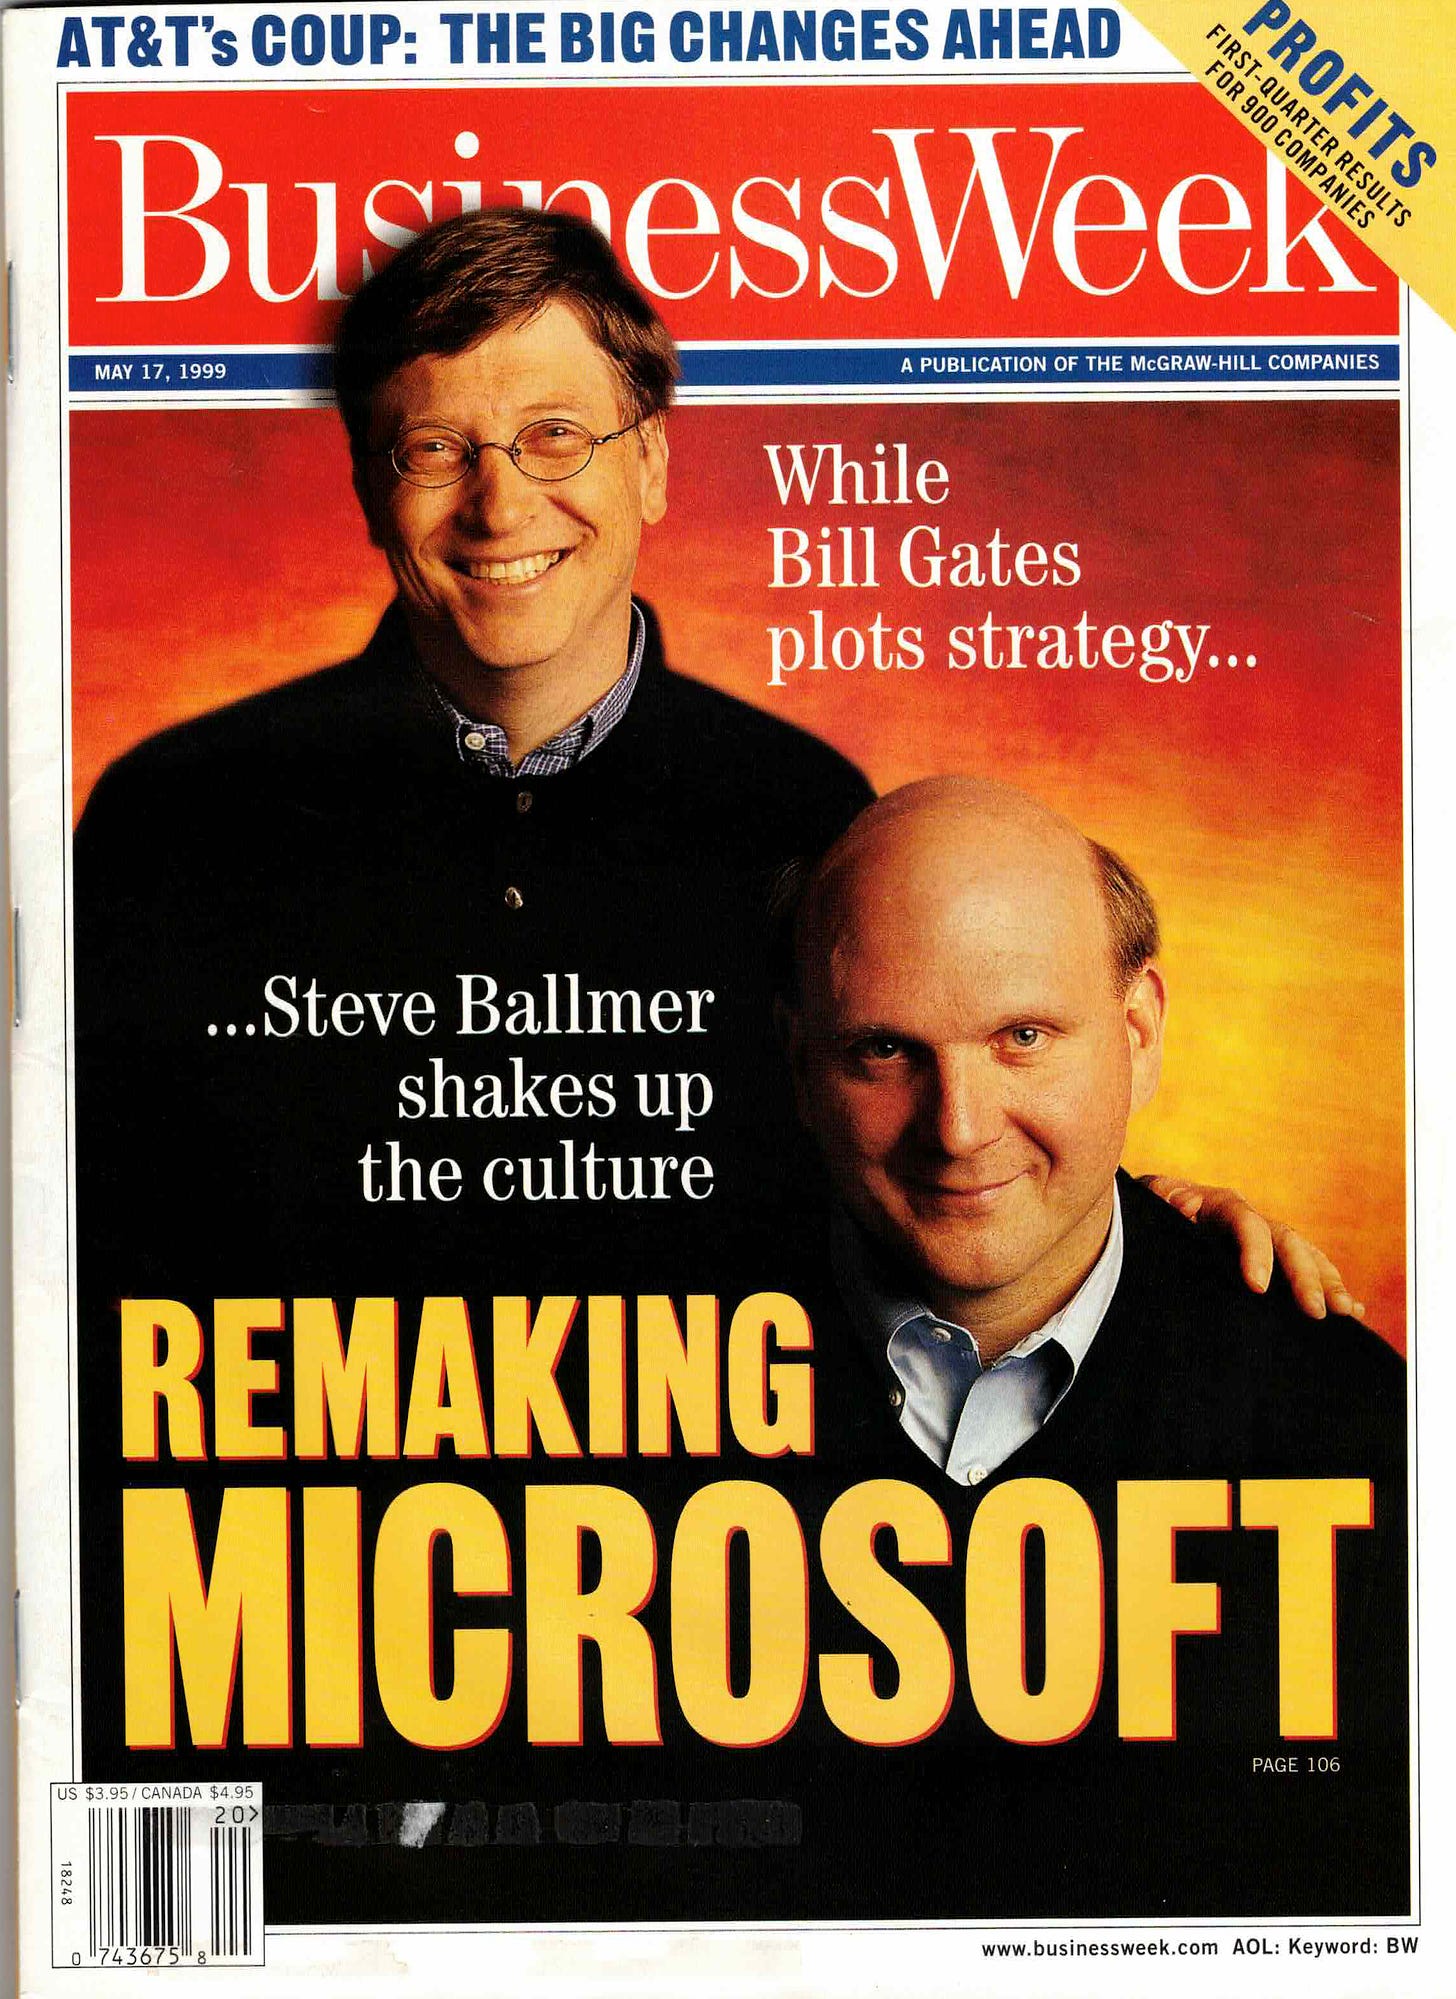 Business week cover as described in text.